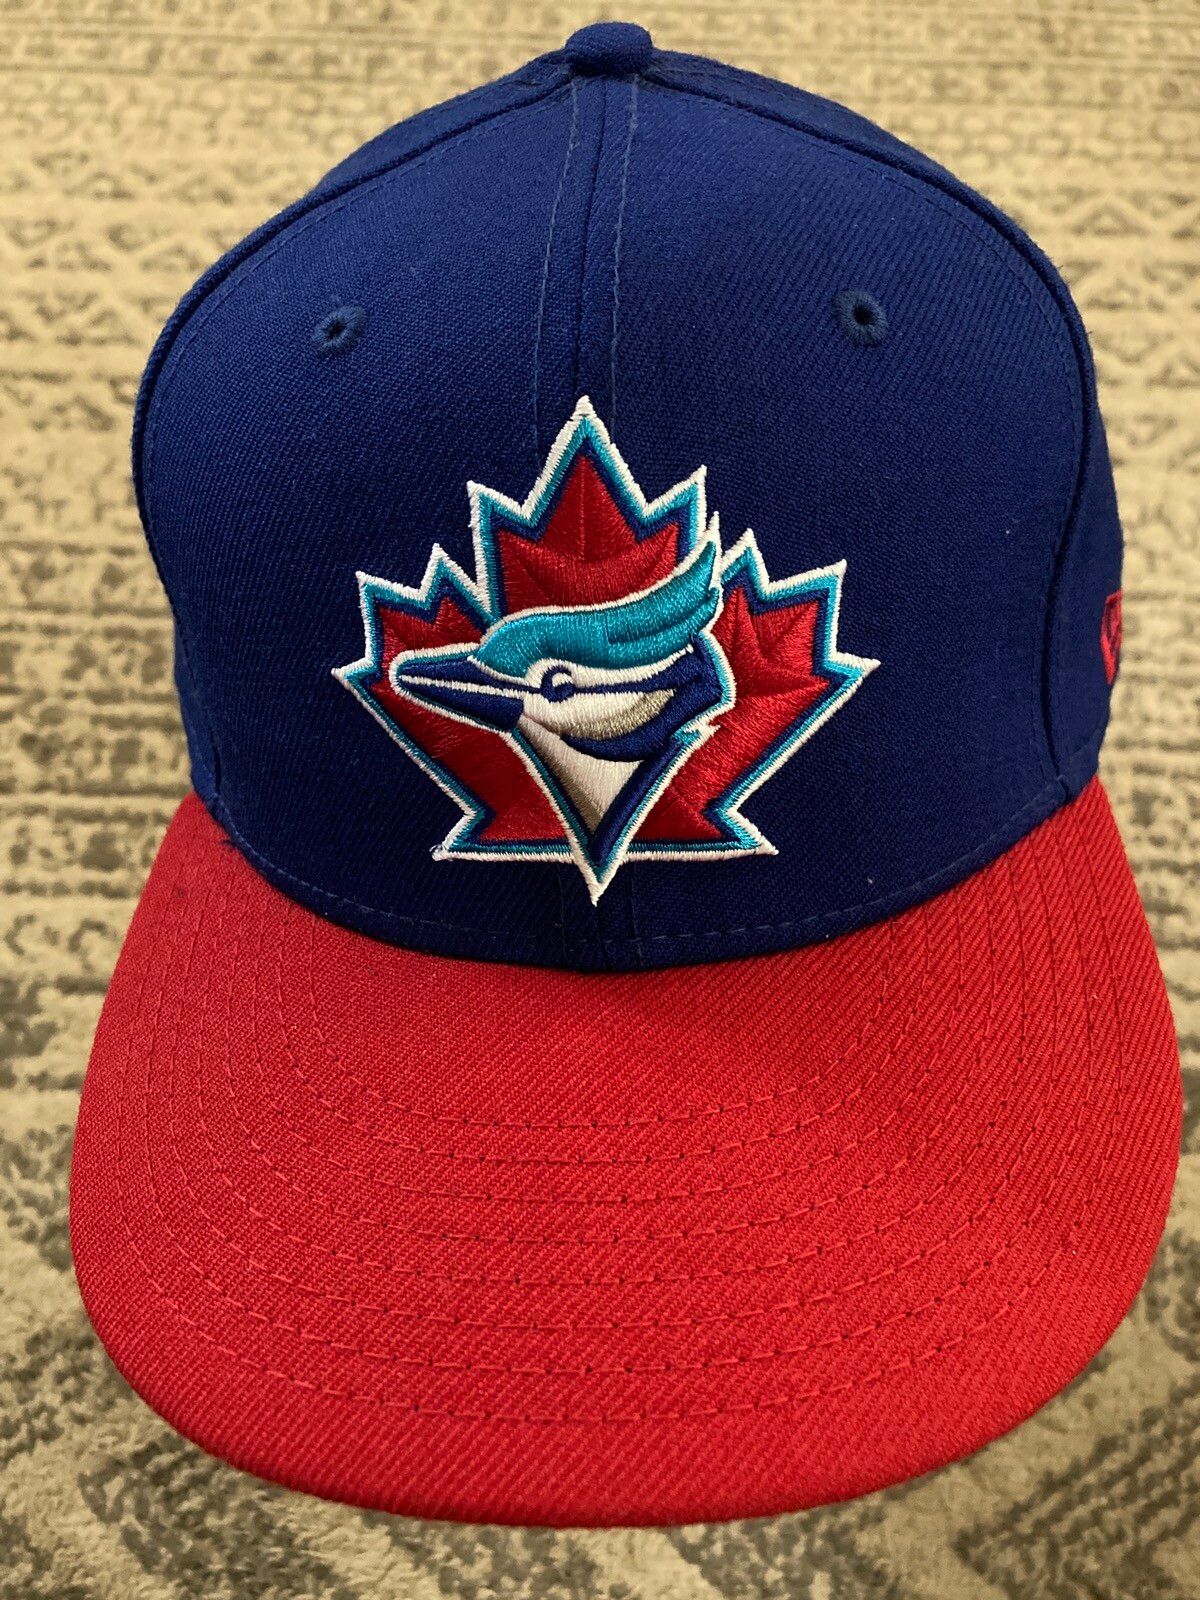 New Era Toronto Blue Jays MLB New Era Baseball Cap Hat cooperstown Size ONE SIZE - 1 Preview